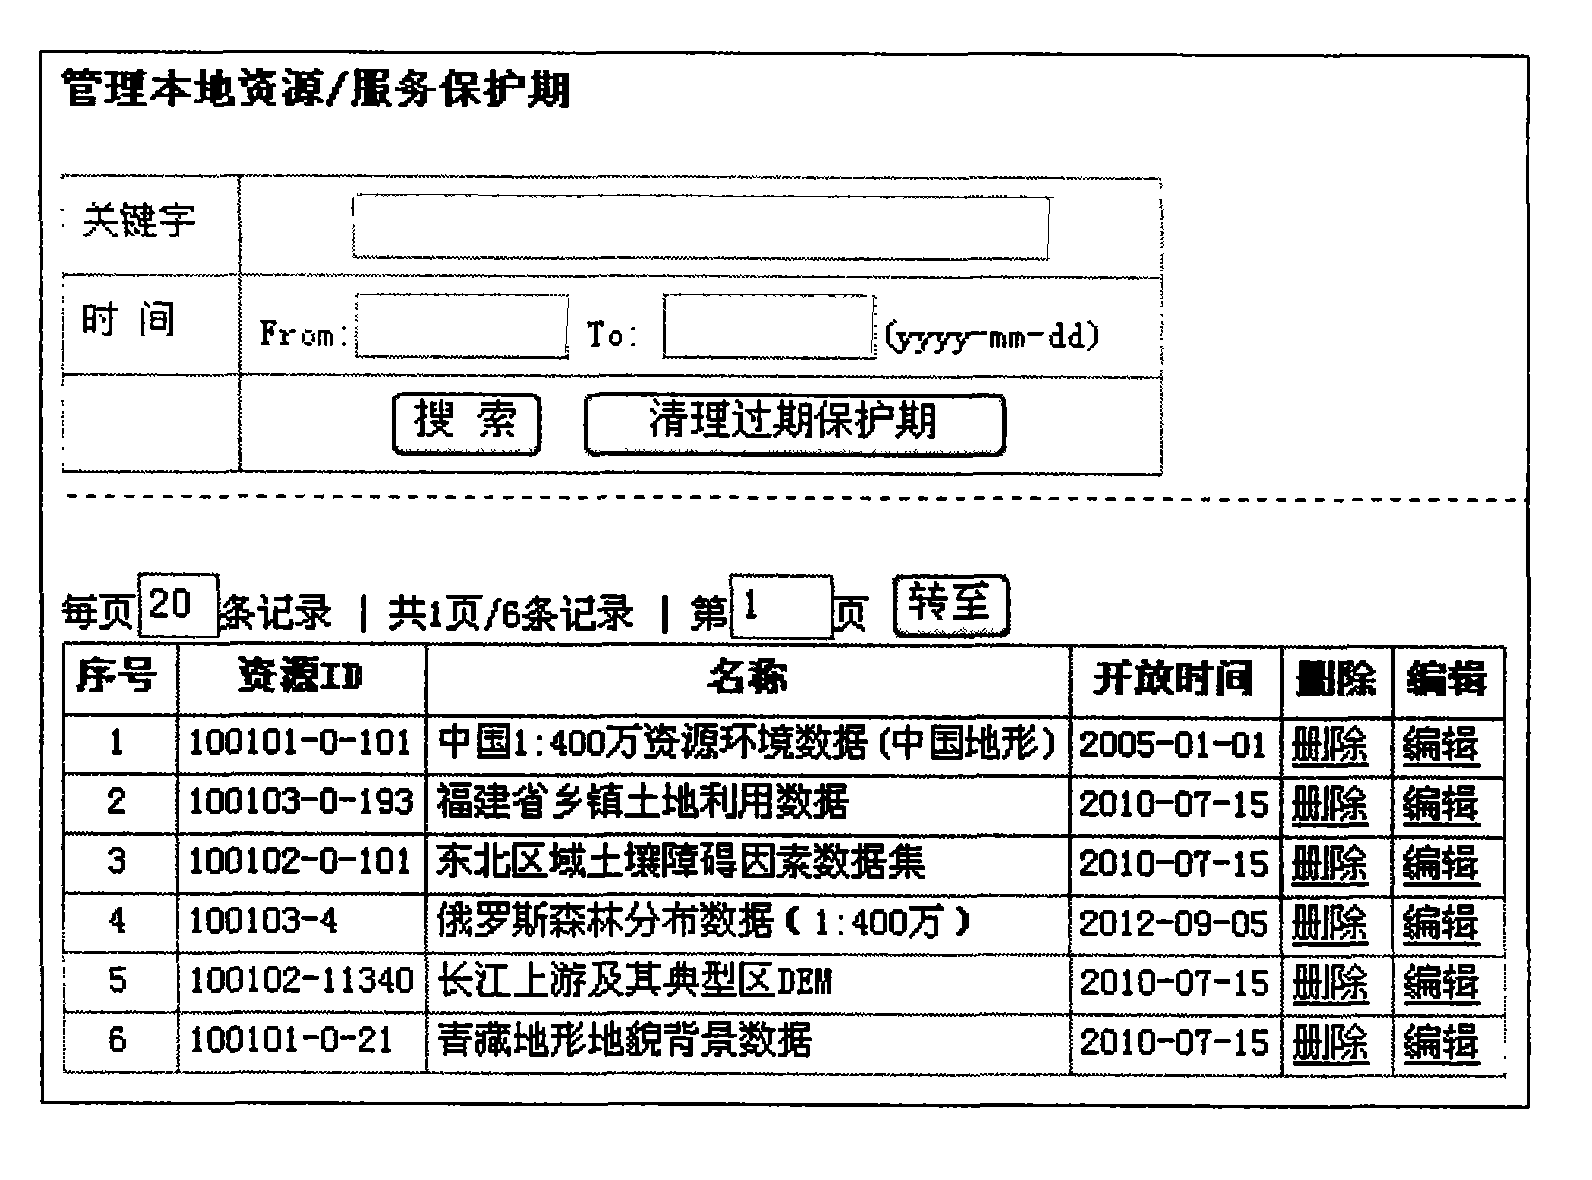 Distributed dual-license and access control method and system